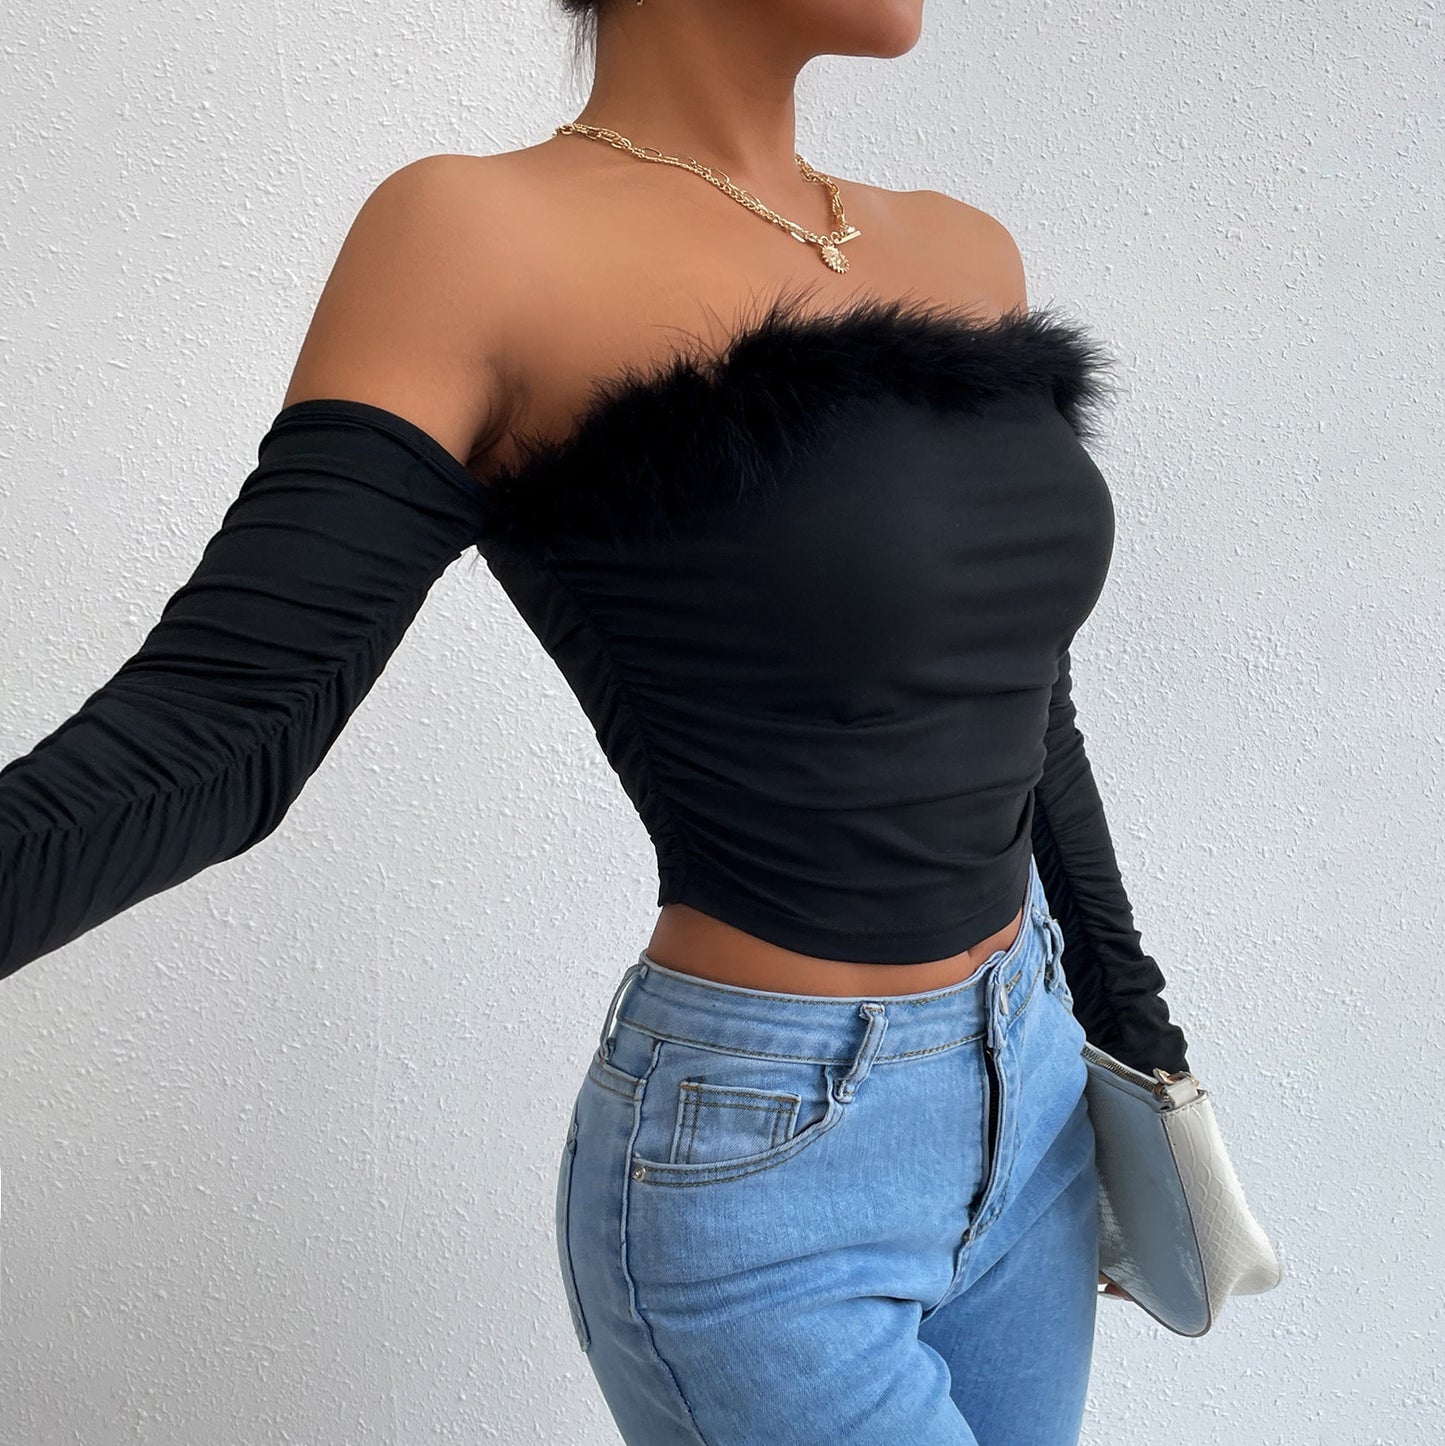 Summer long-sleeved top, straight neck, backless and off-the-shoulder top